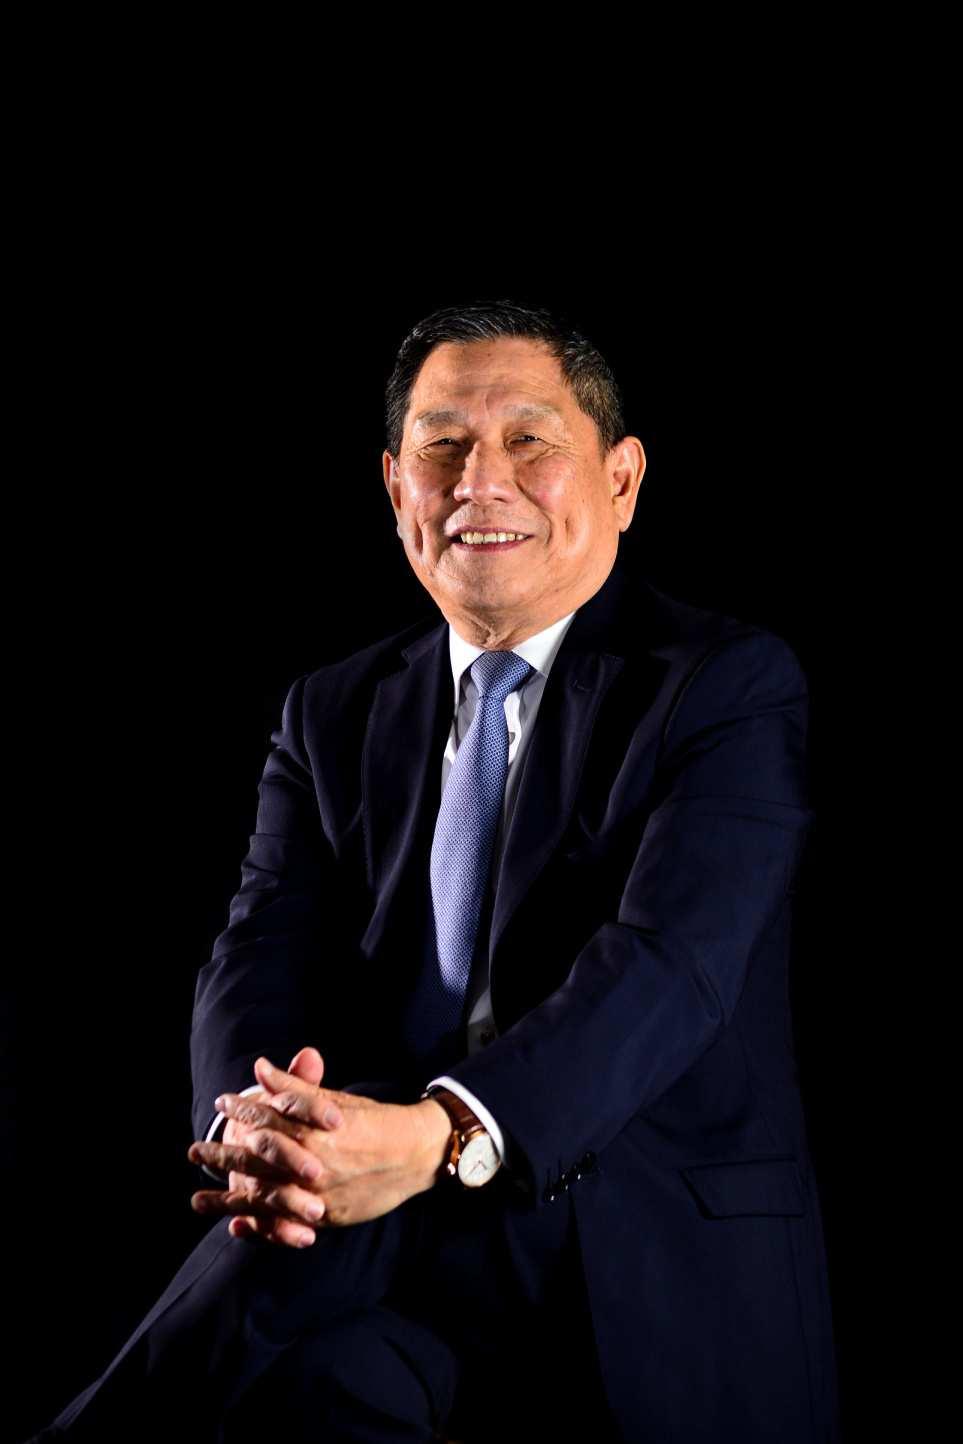 2 INSIGHT: SEM interviews Kee Chong Li Kwong Wing, Chairman of SBM Holdings Ltd, in the context of the listing of the first Pan-African Depositary Receipt on the Exchange 1.